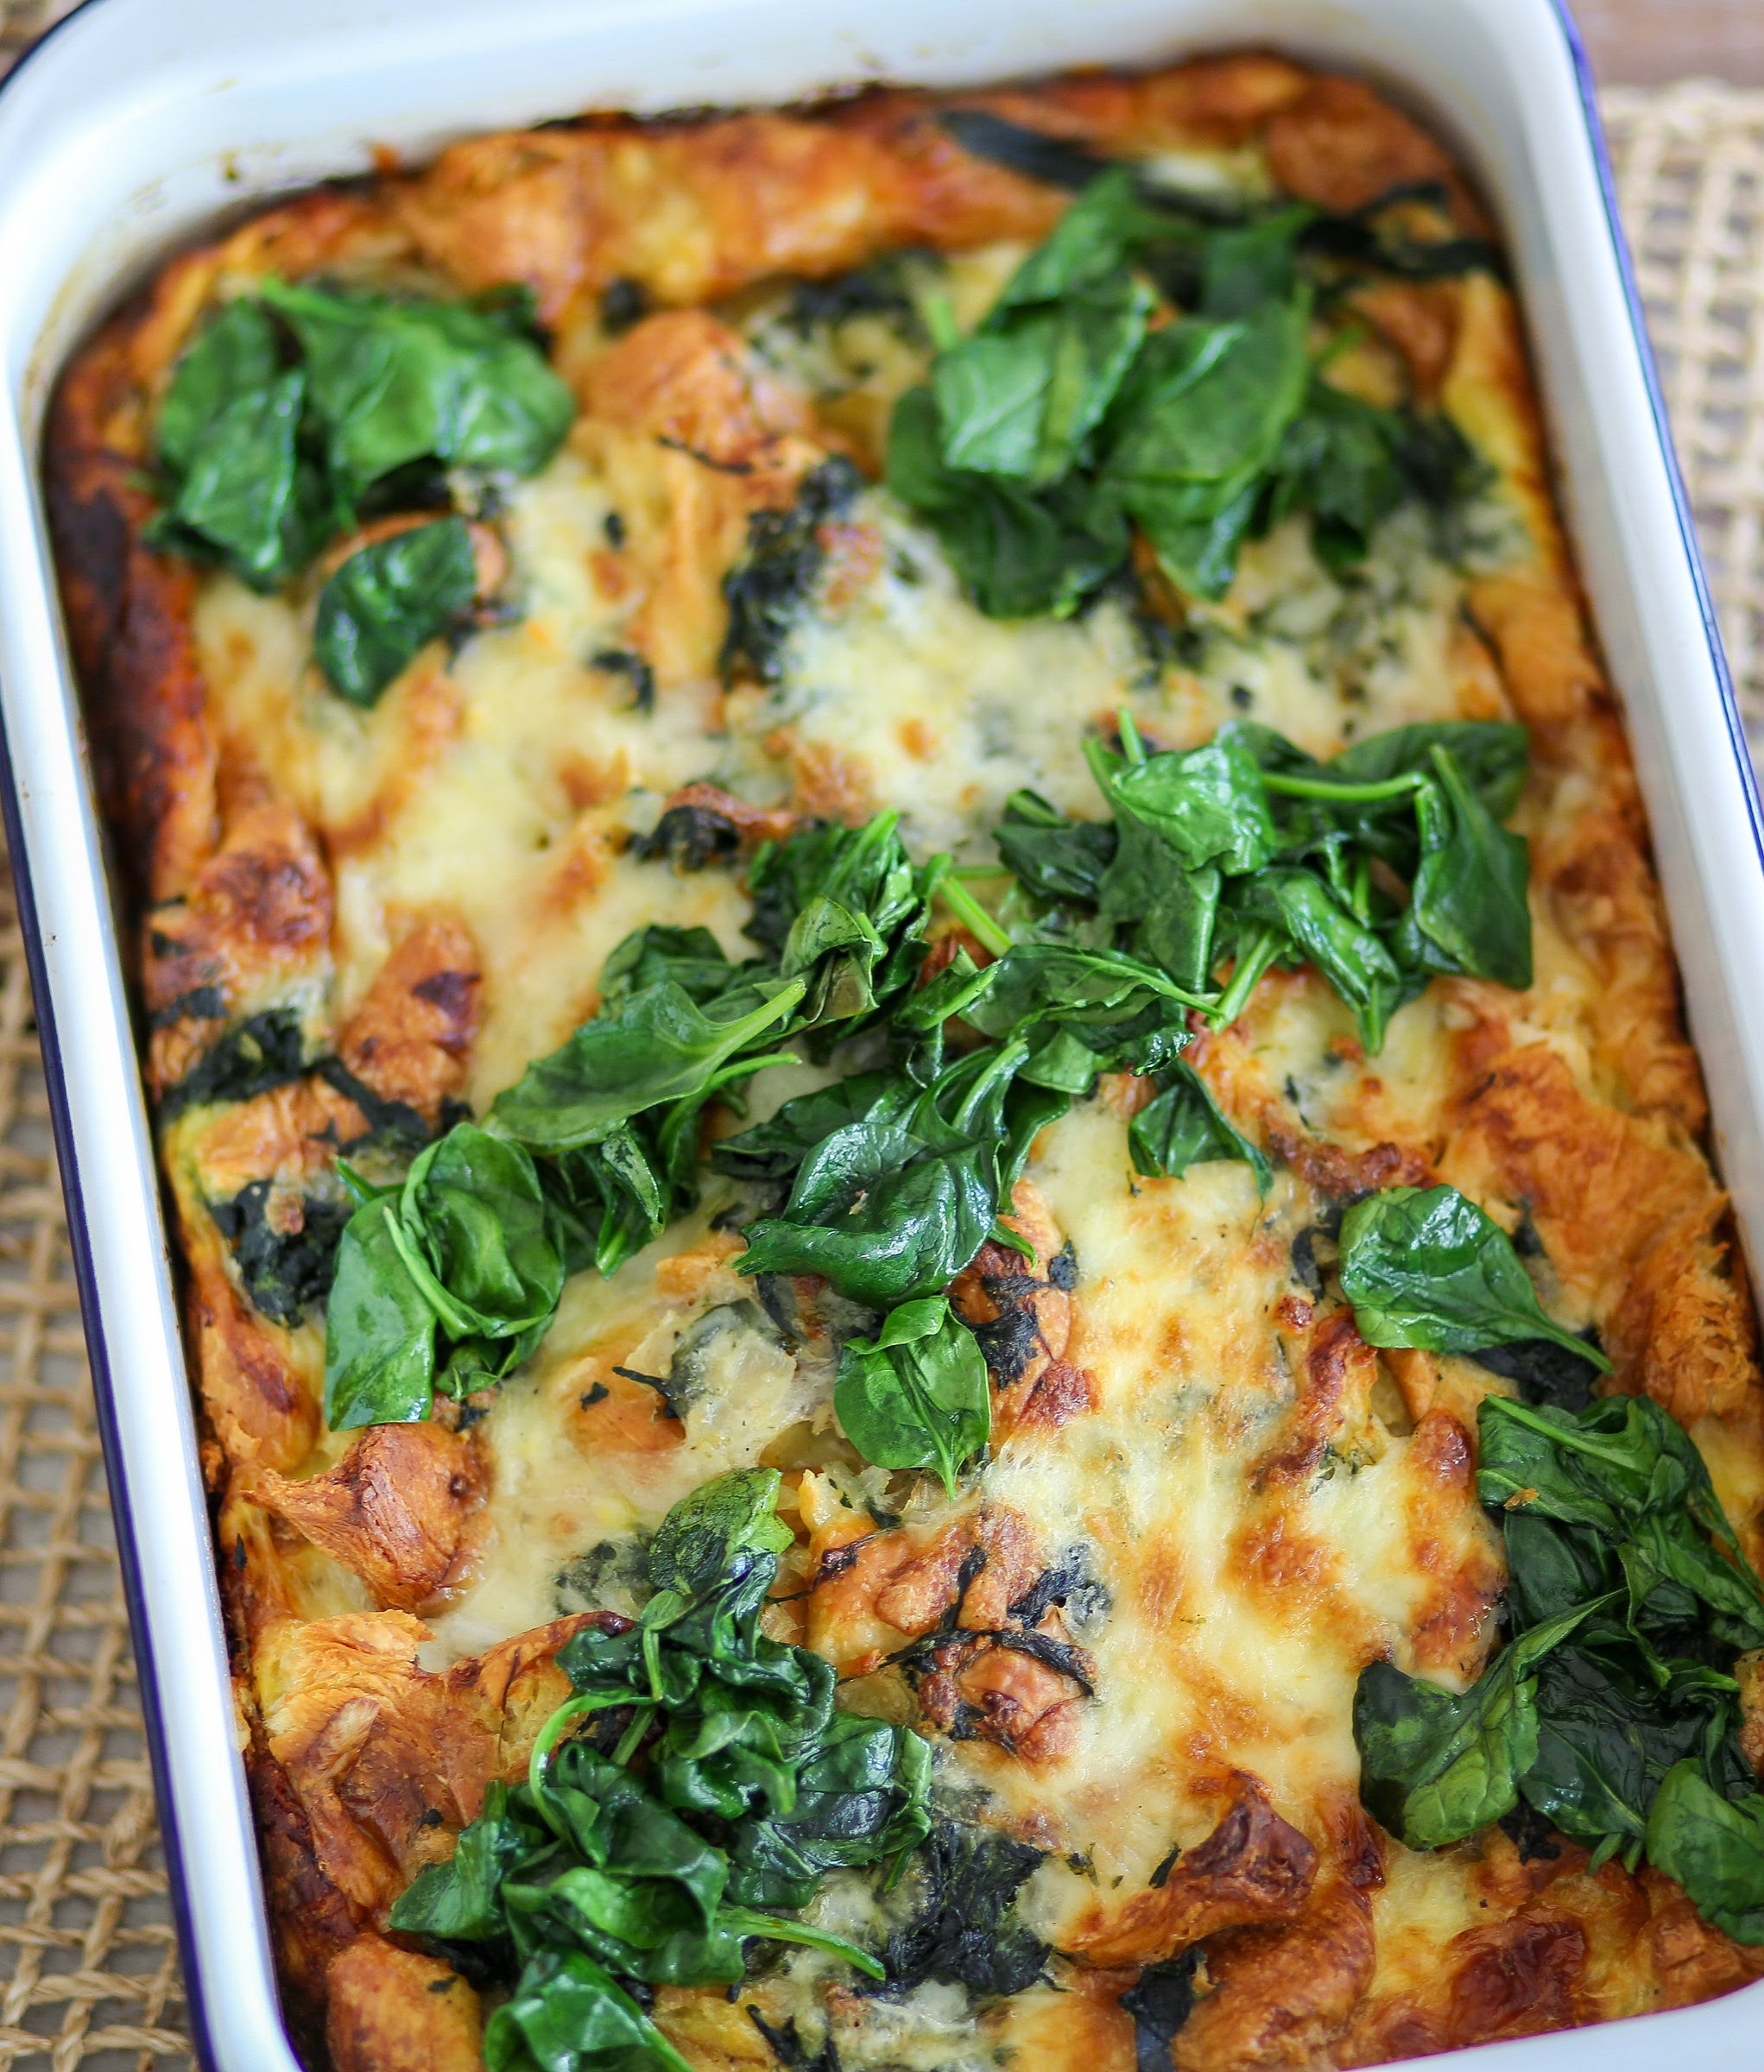 A casserole dish with spinach and cheese on top.